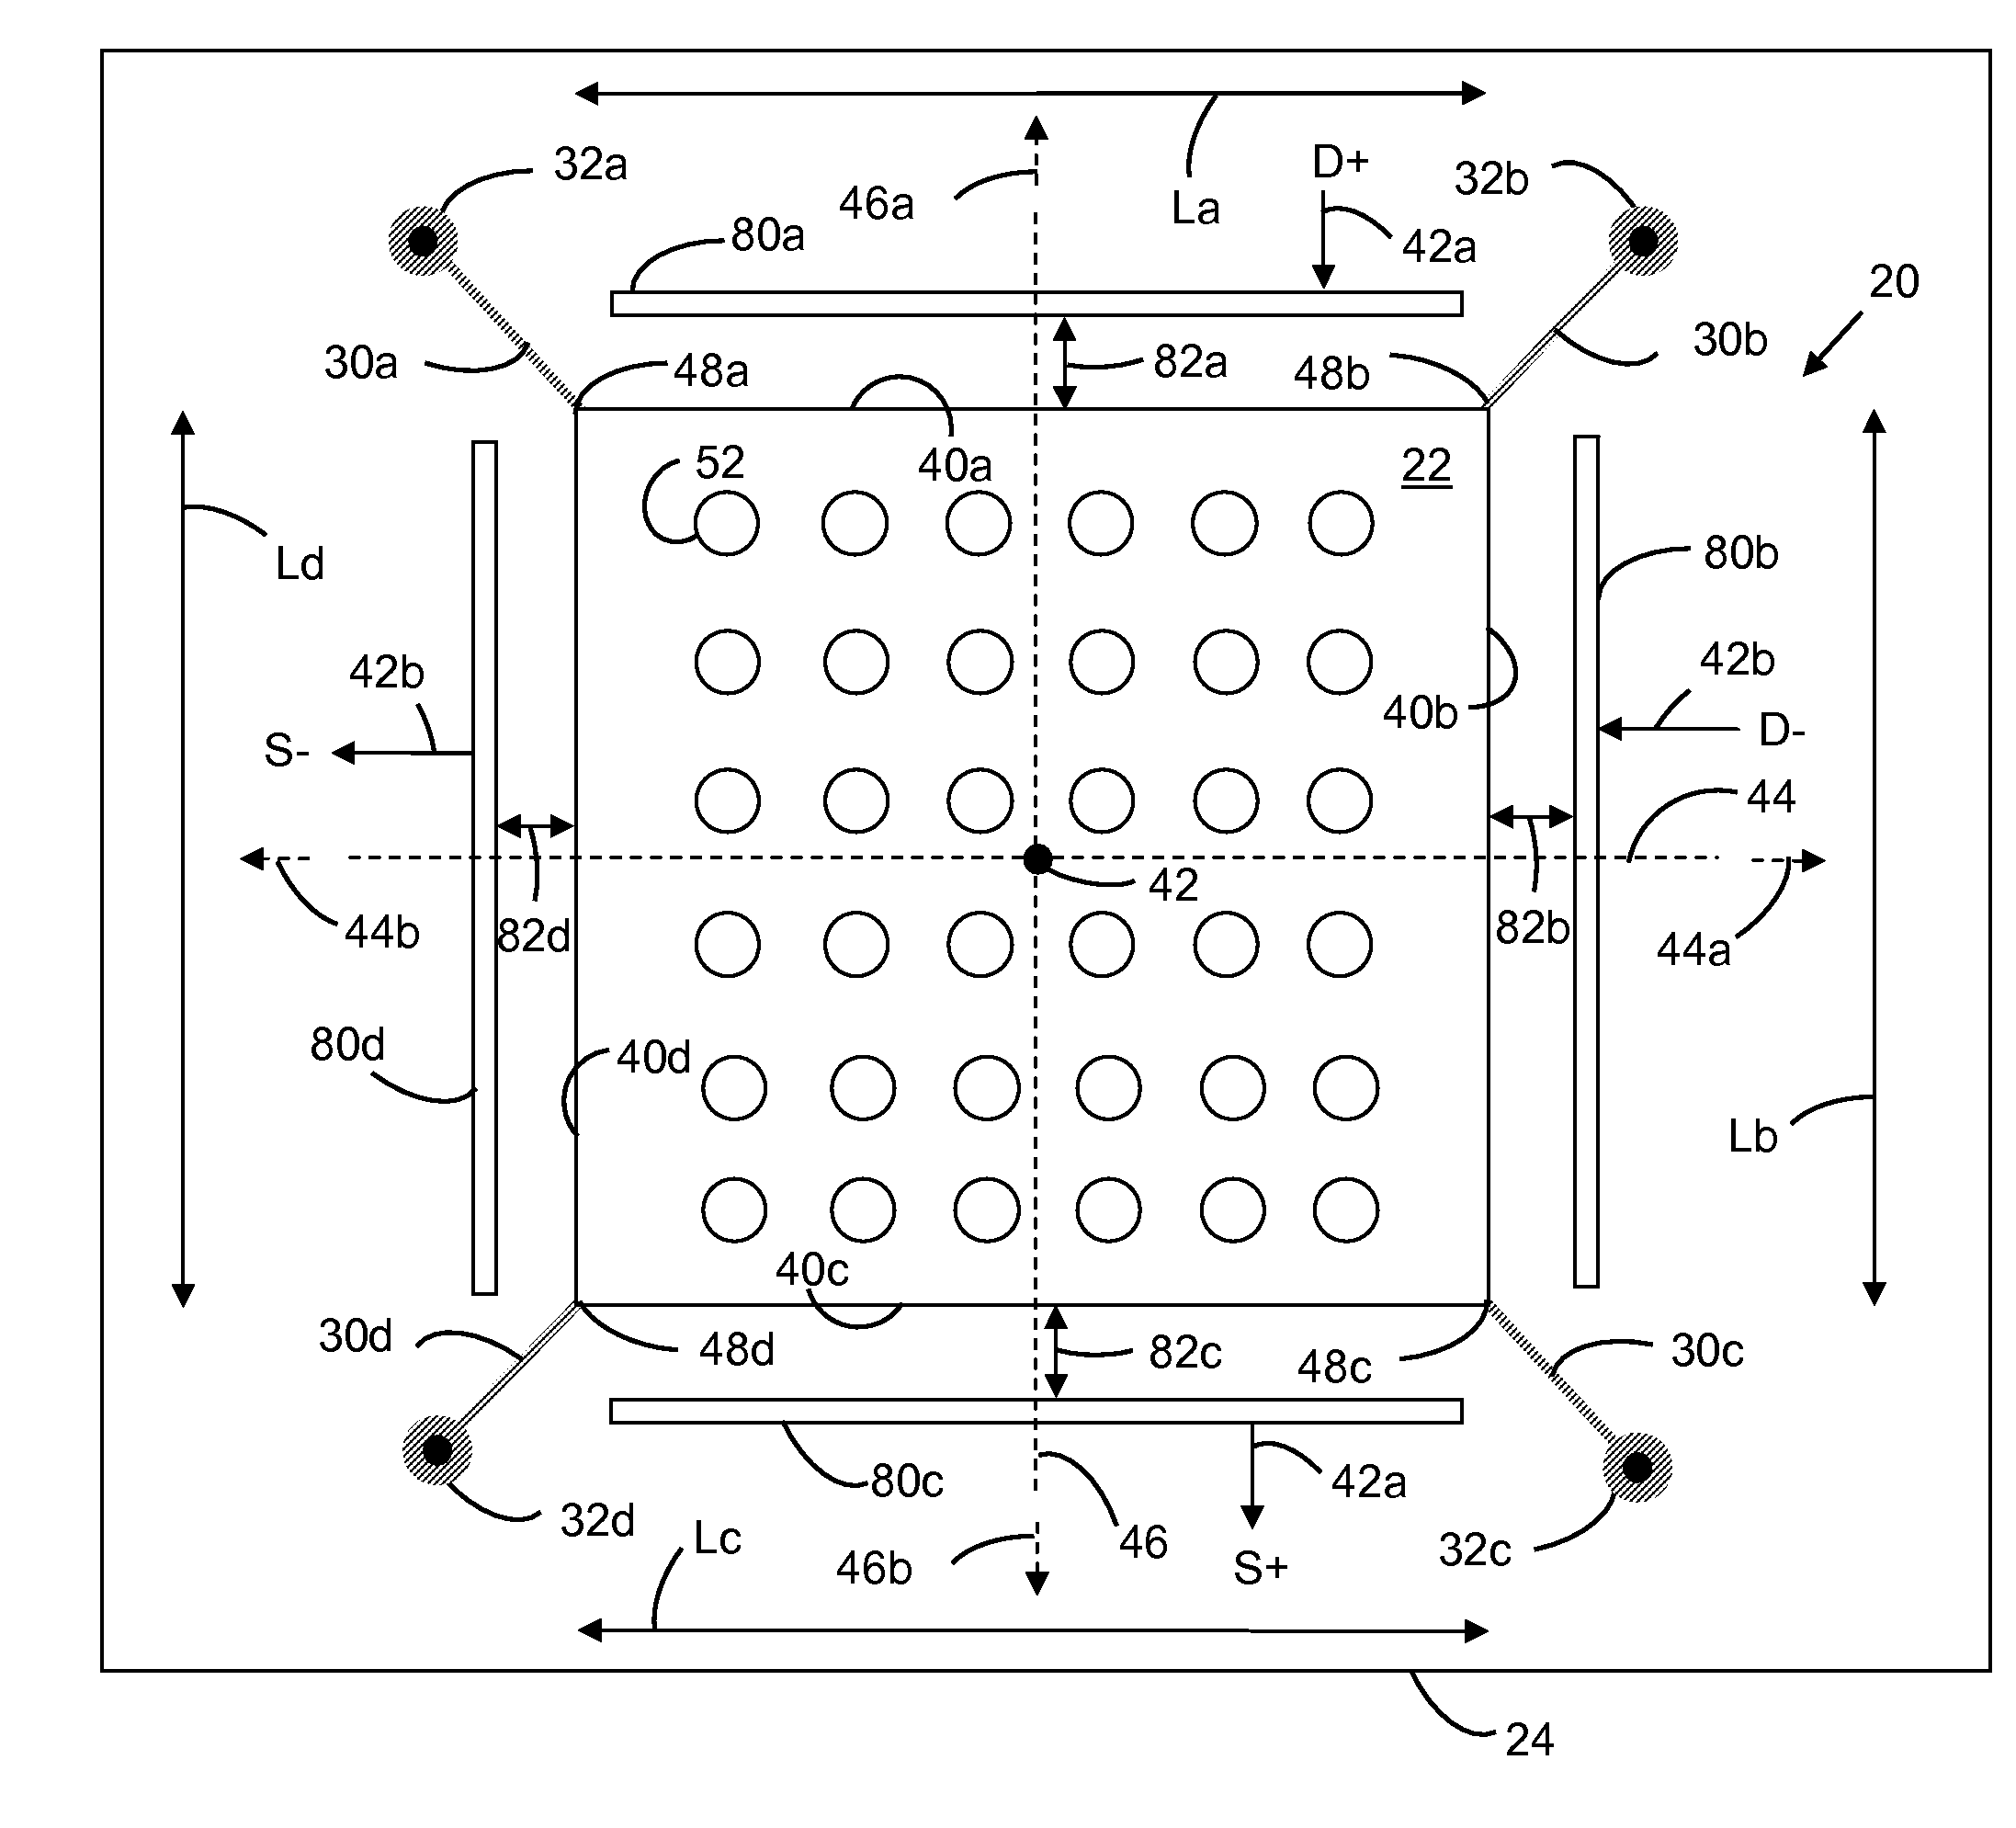 MEMS resonator array structure and method of operating and using same